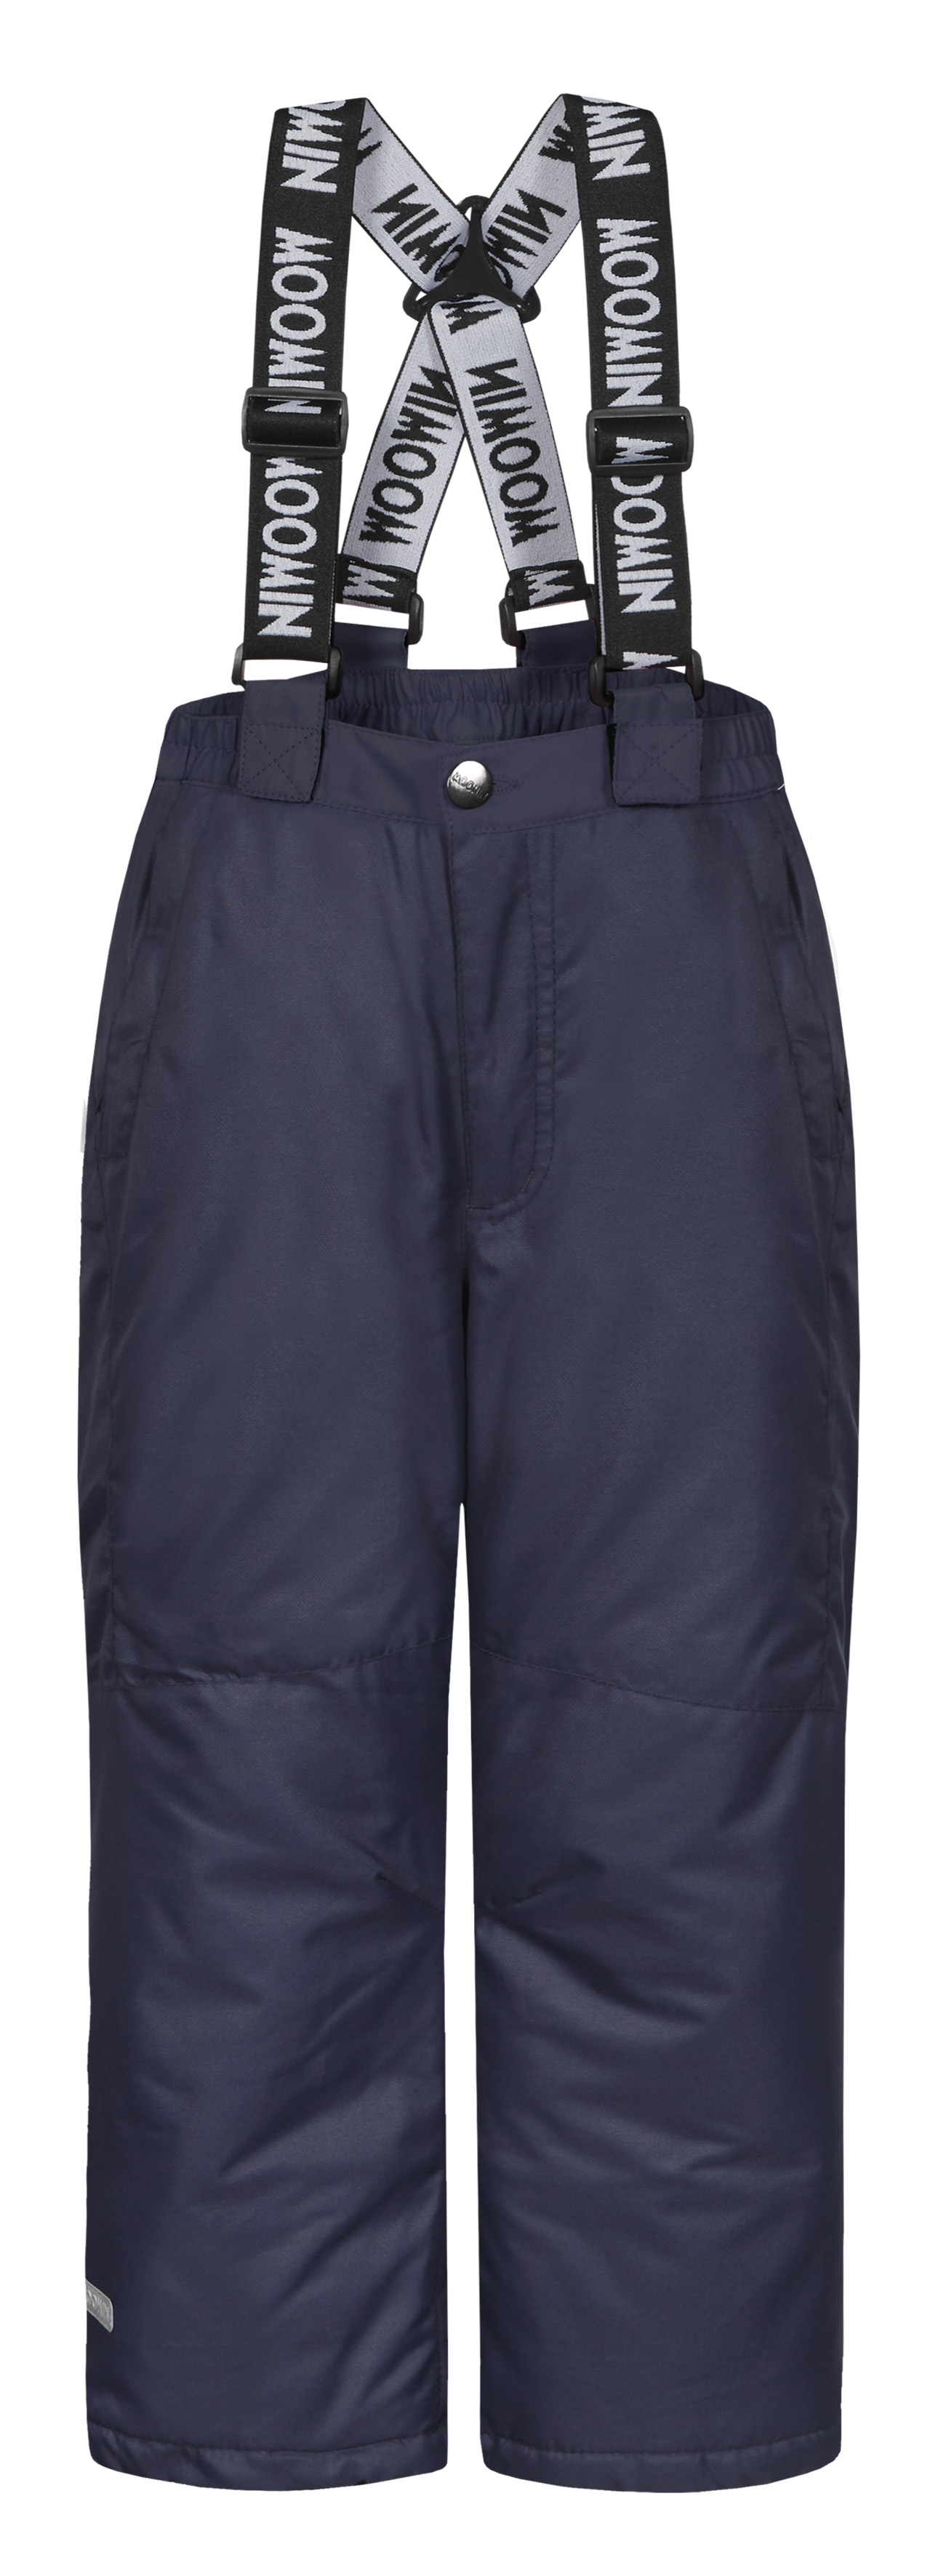 L-Fashion Group Oy - Kids Padded trousers